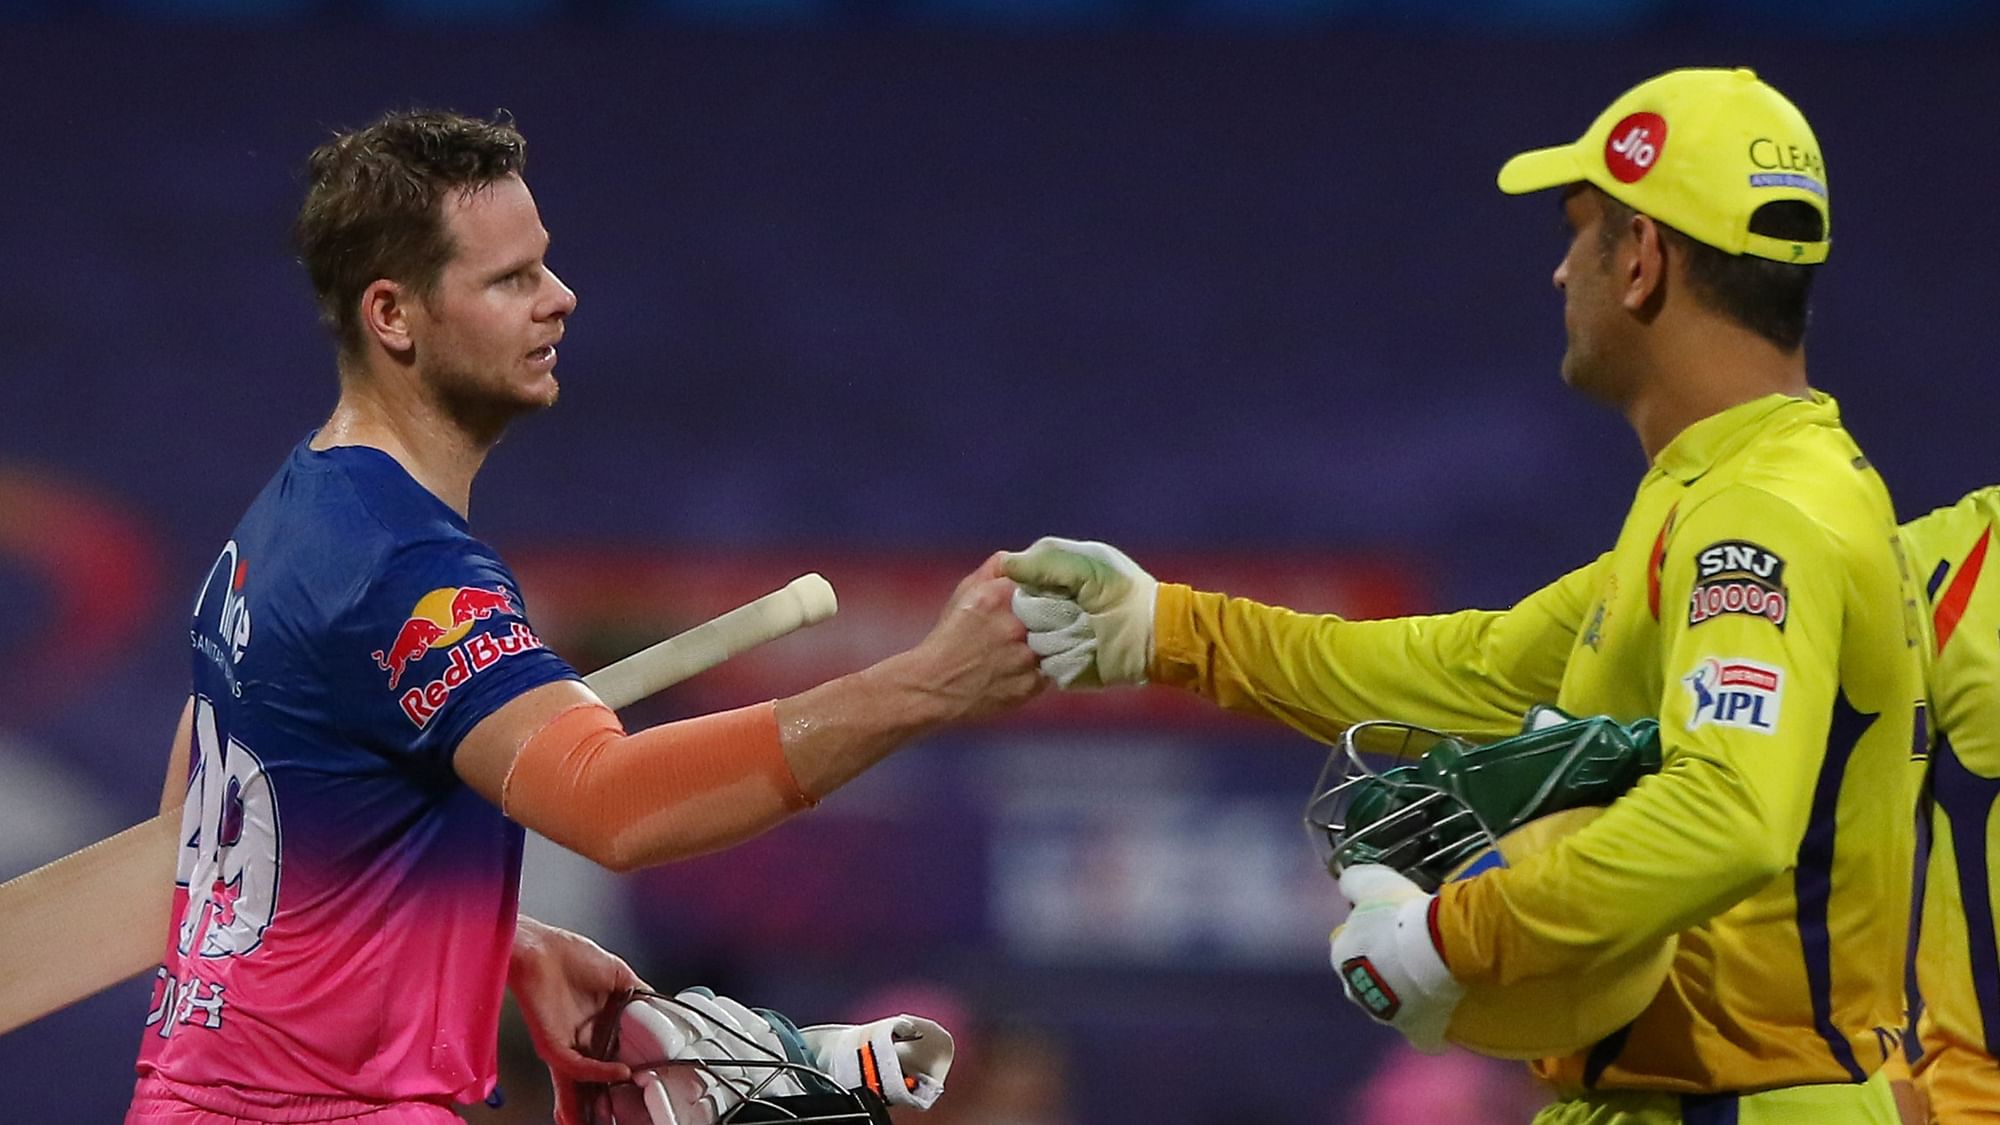 Rajasthan Royals defeated Chennai Super Kings by 7 wickets to register their fourth victory of the season.